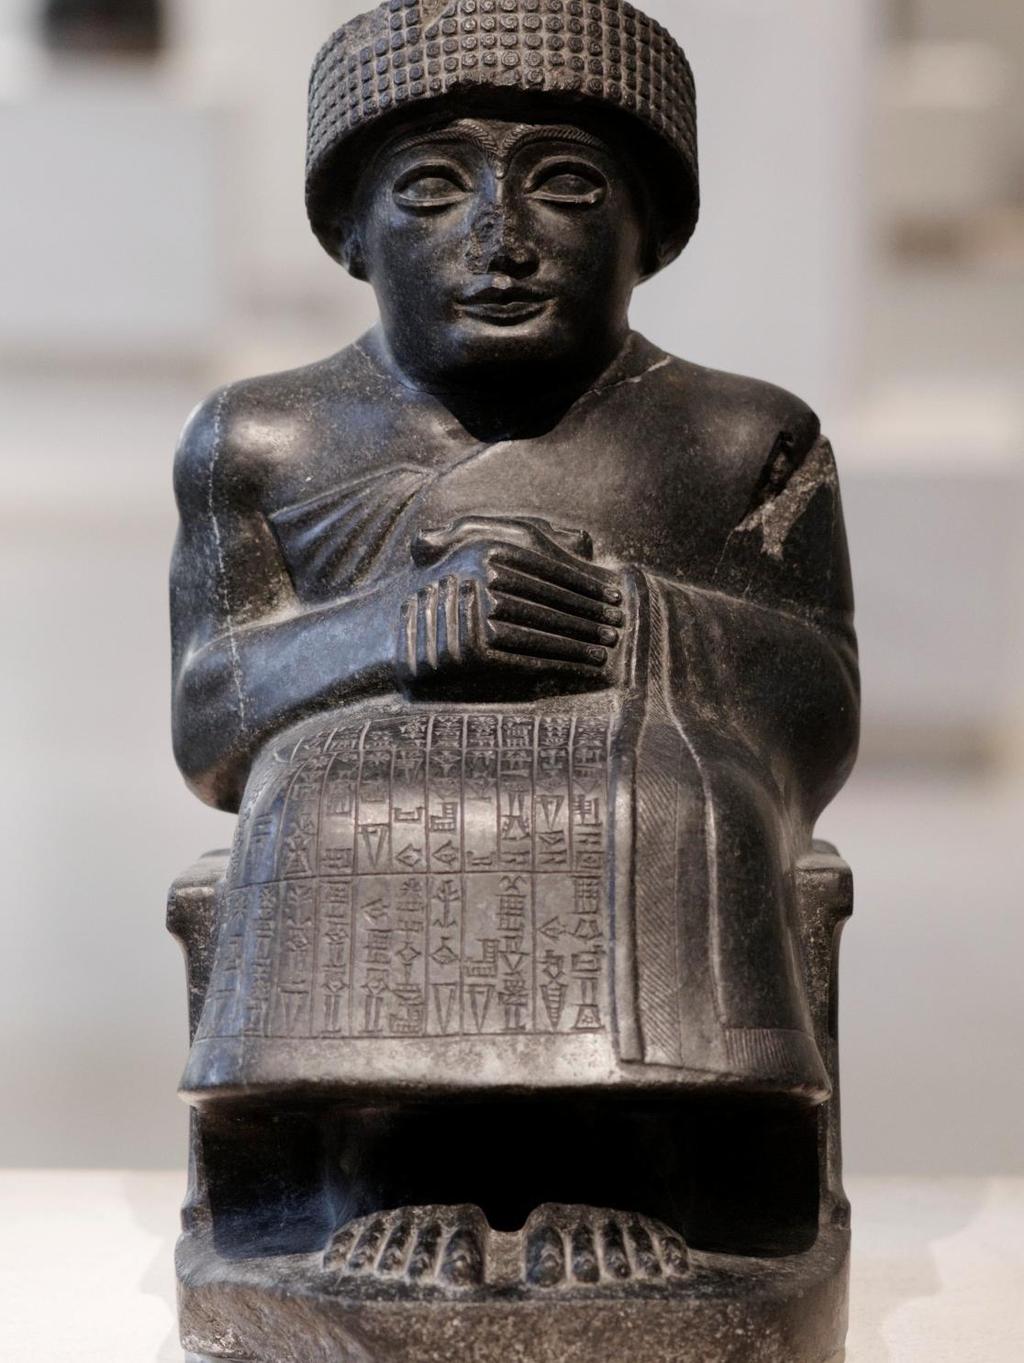 Diorite Statue of Gudea from the Louvre These portraits of Gudea stood in temples where they could render perpetual service to the gods and intercede with the divine powers on his behalf.